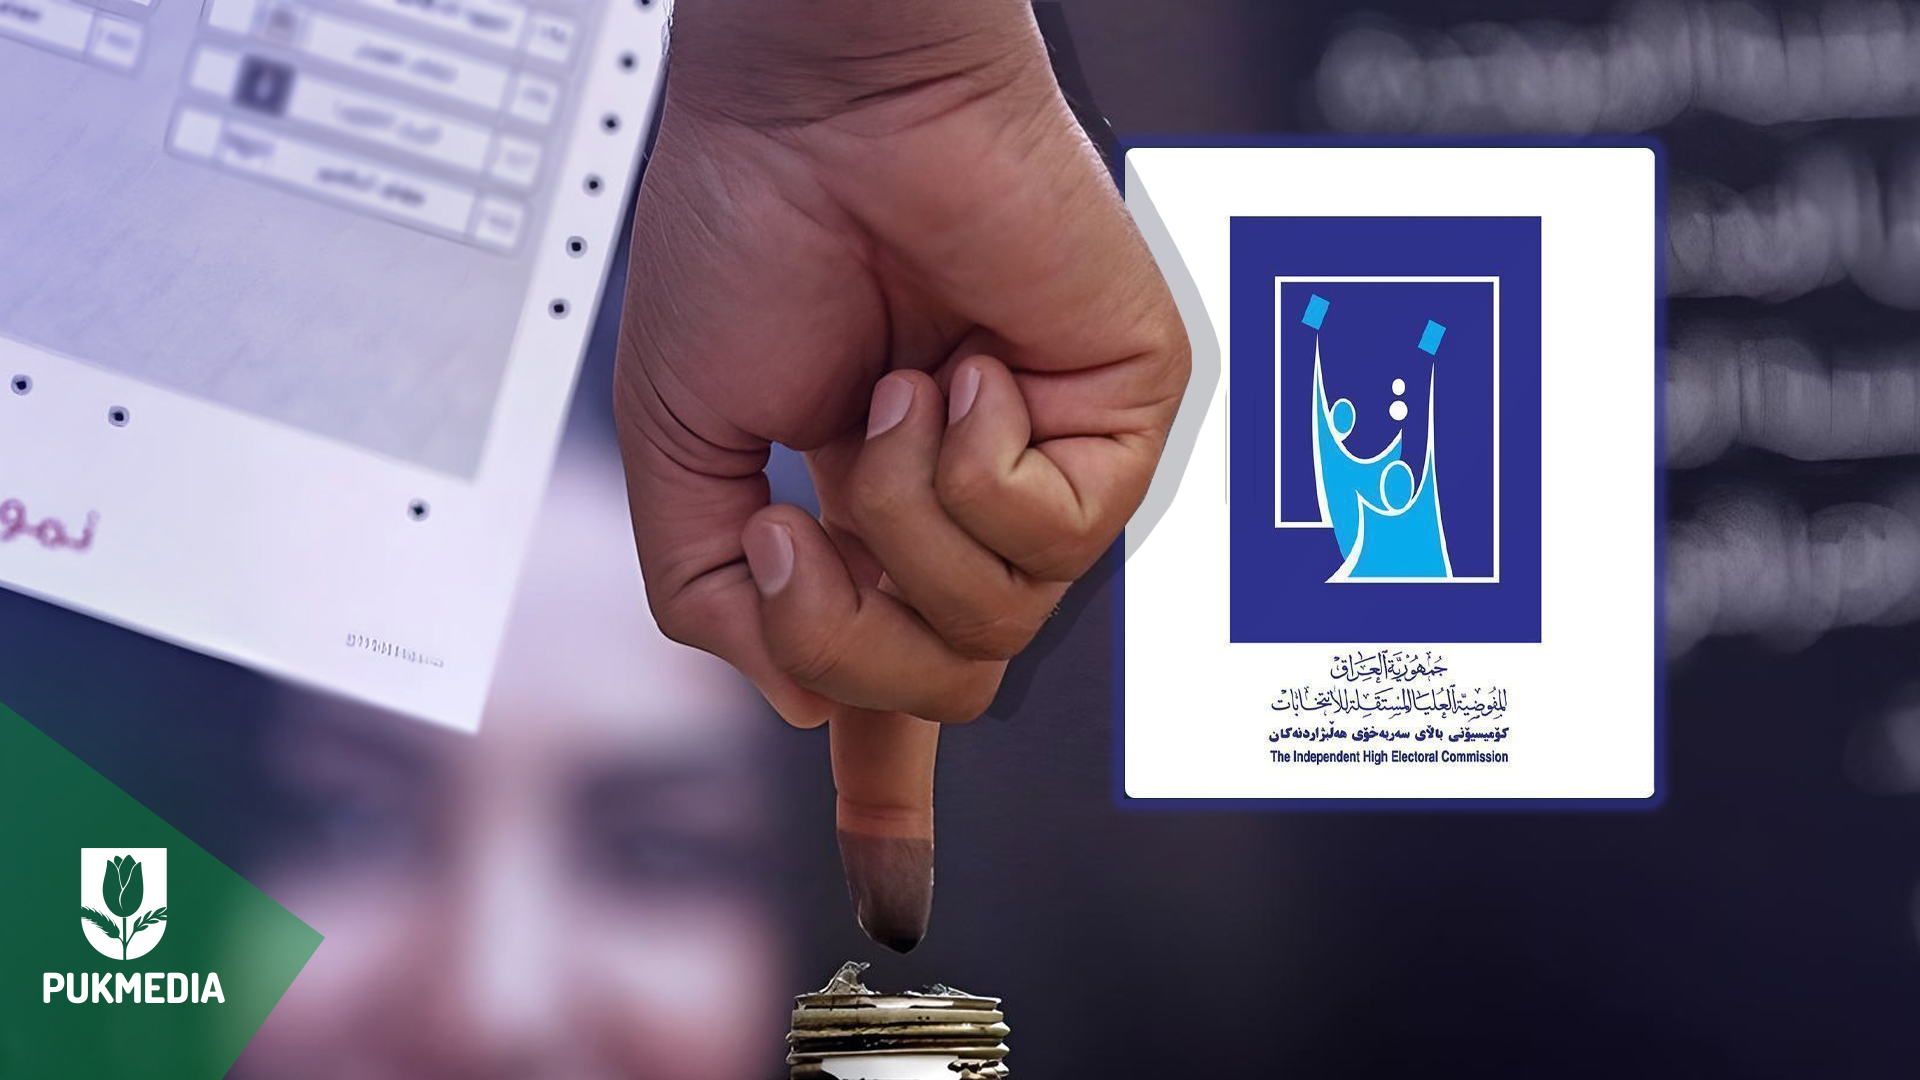  IHEC's logo, a voting sheet, and a voters' hand.